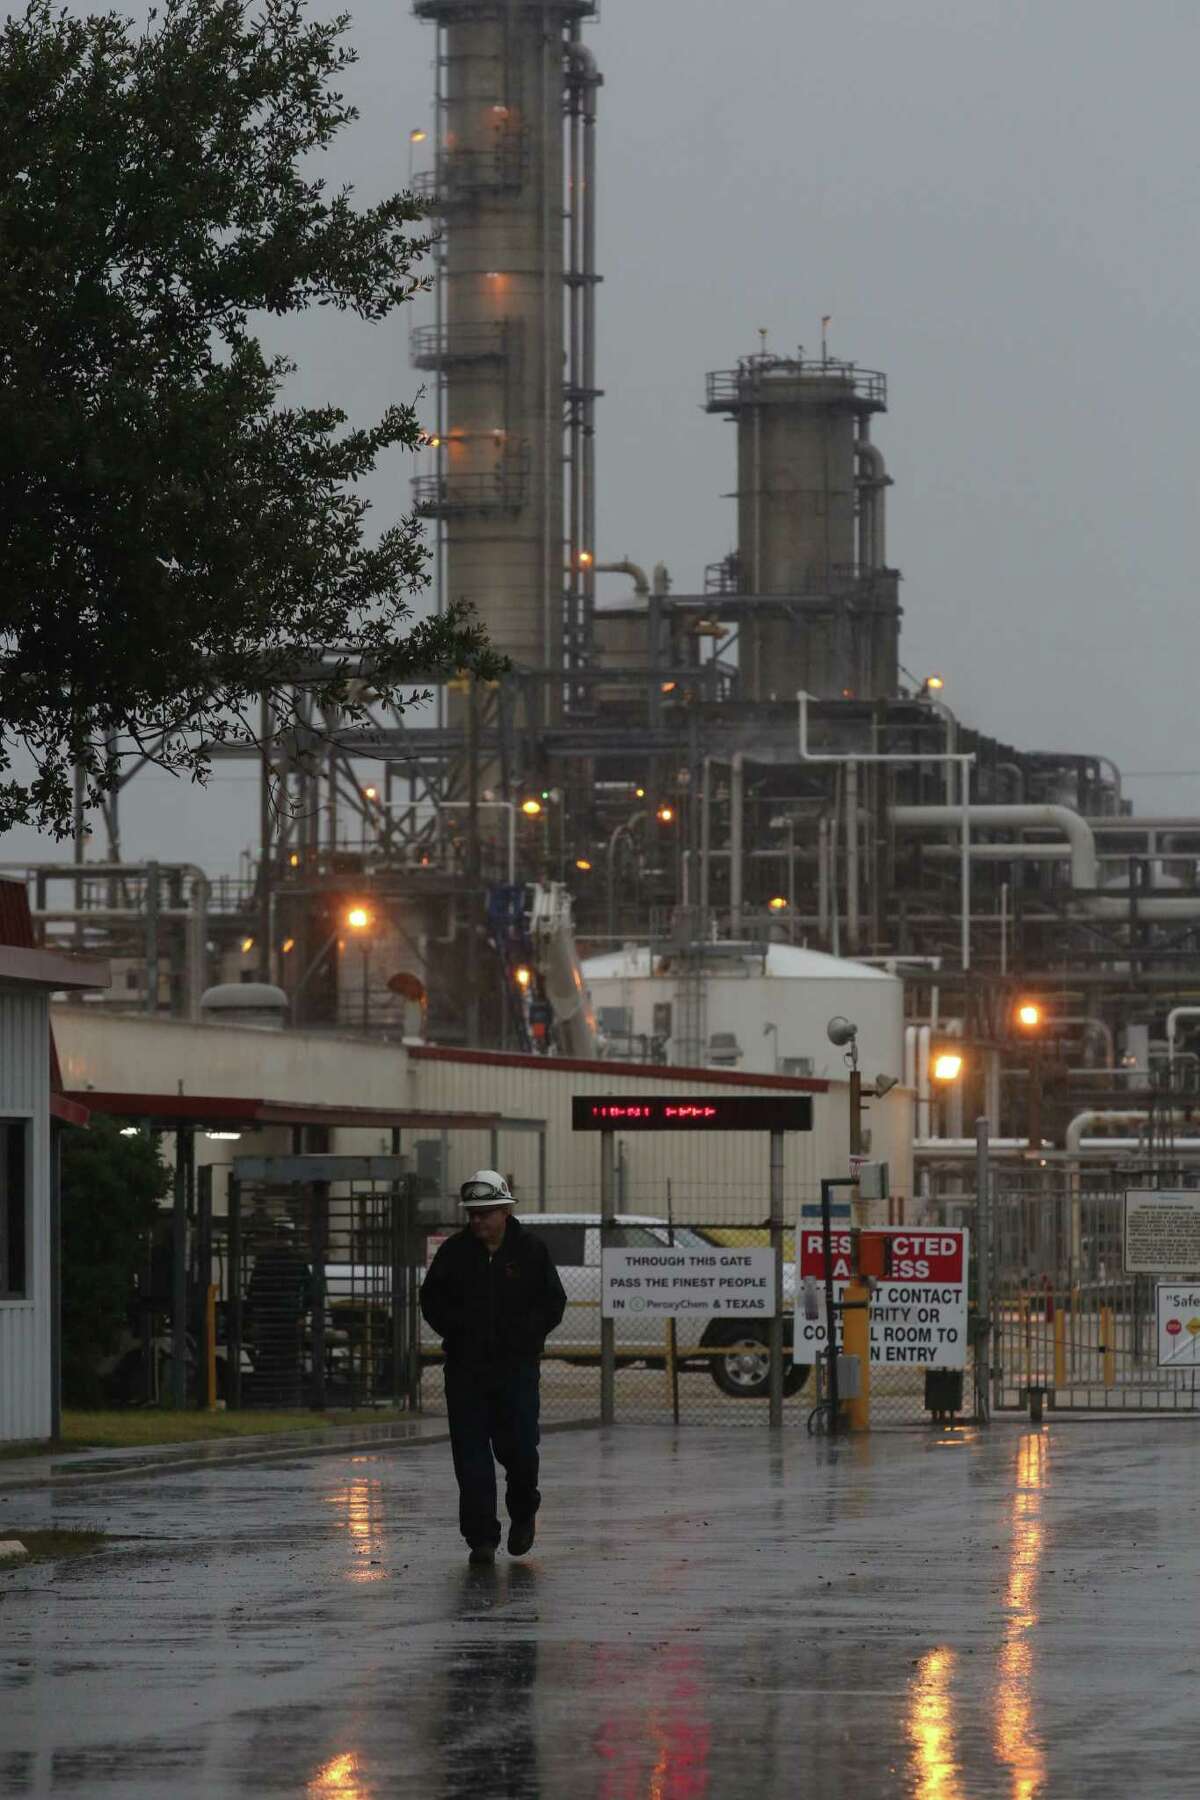 A man walks by the gate of a PeroxyChem plant in the 12000 block of Bay Area Blvd, in the Bayport complex, Saturday Jan. 16, 2016, in Pasadena. One person was killed and three were injured in a chemical explosion or leak, according to authorities.